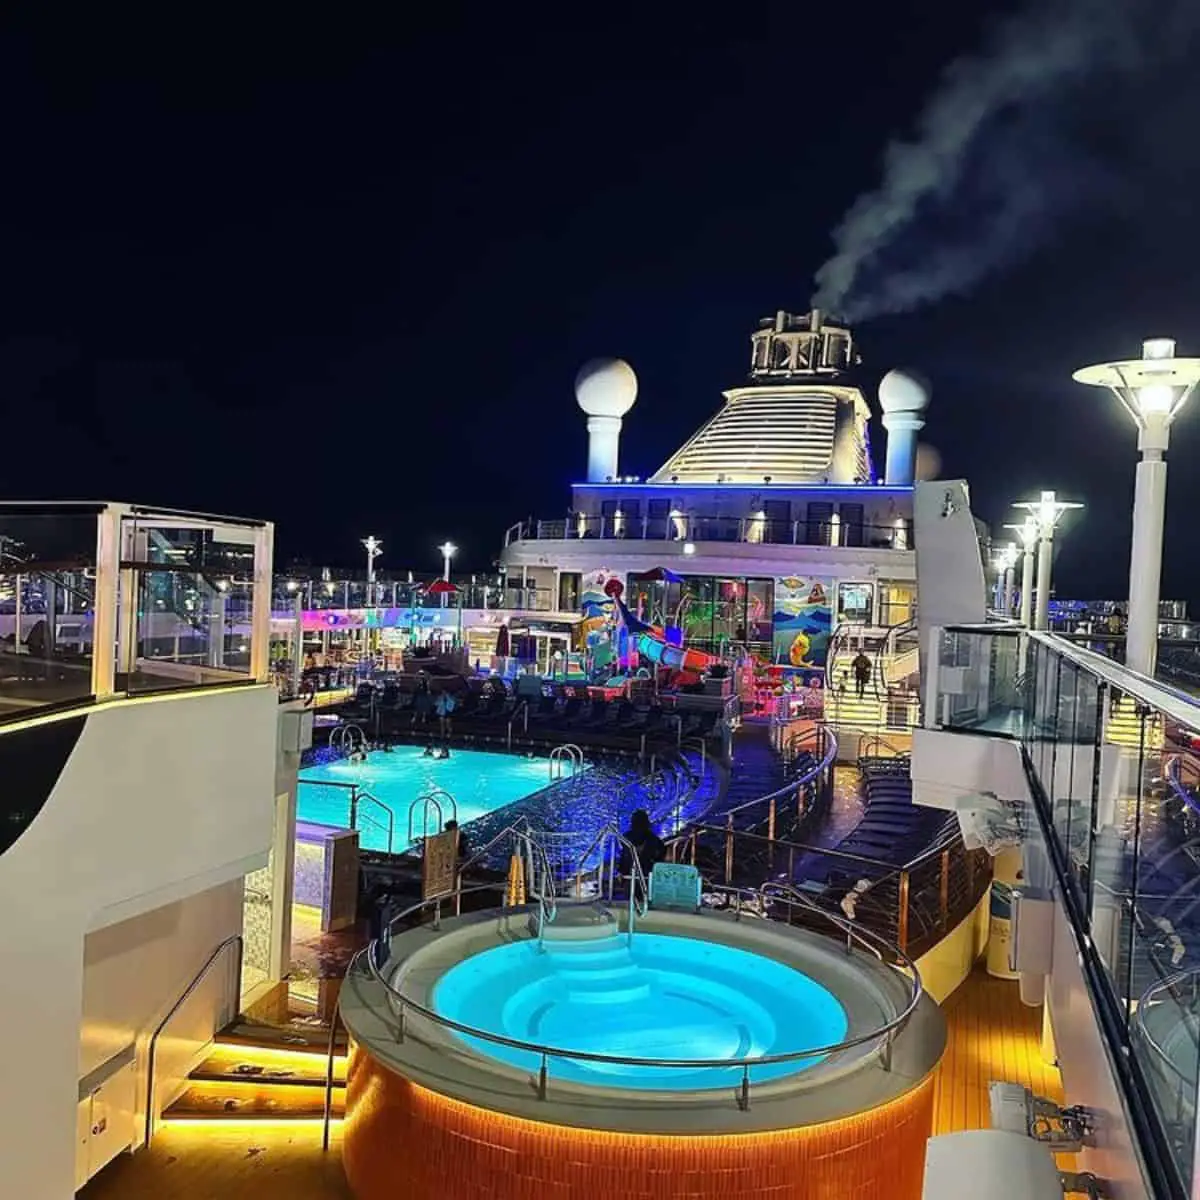 Cruise line with a luxurious night view